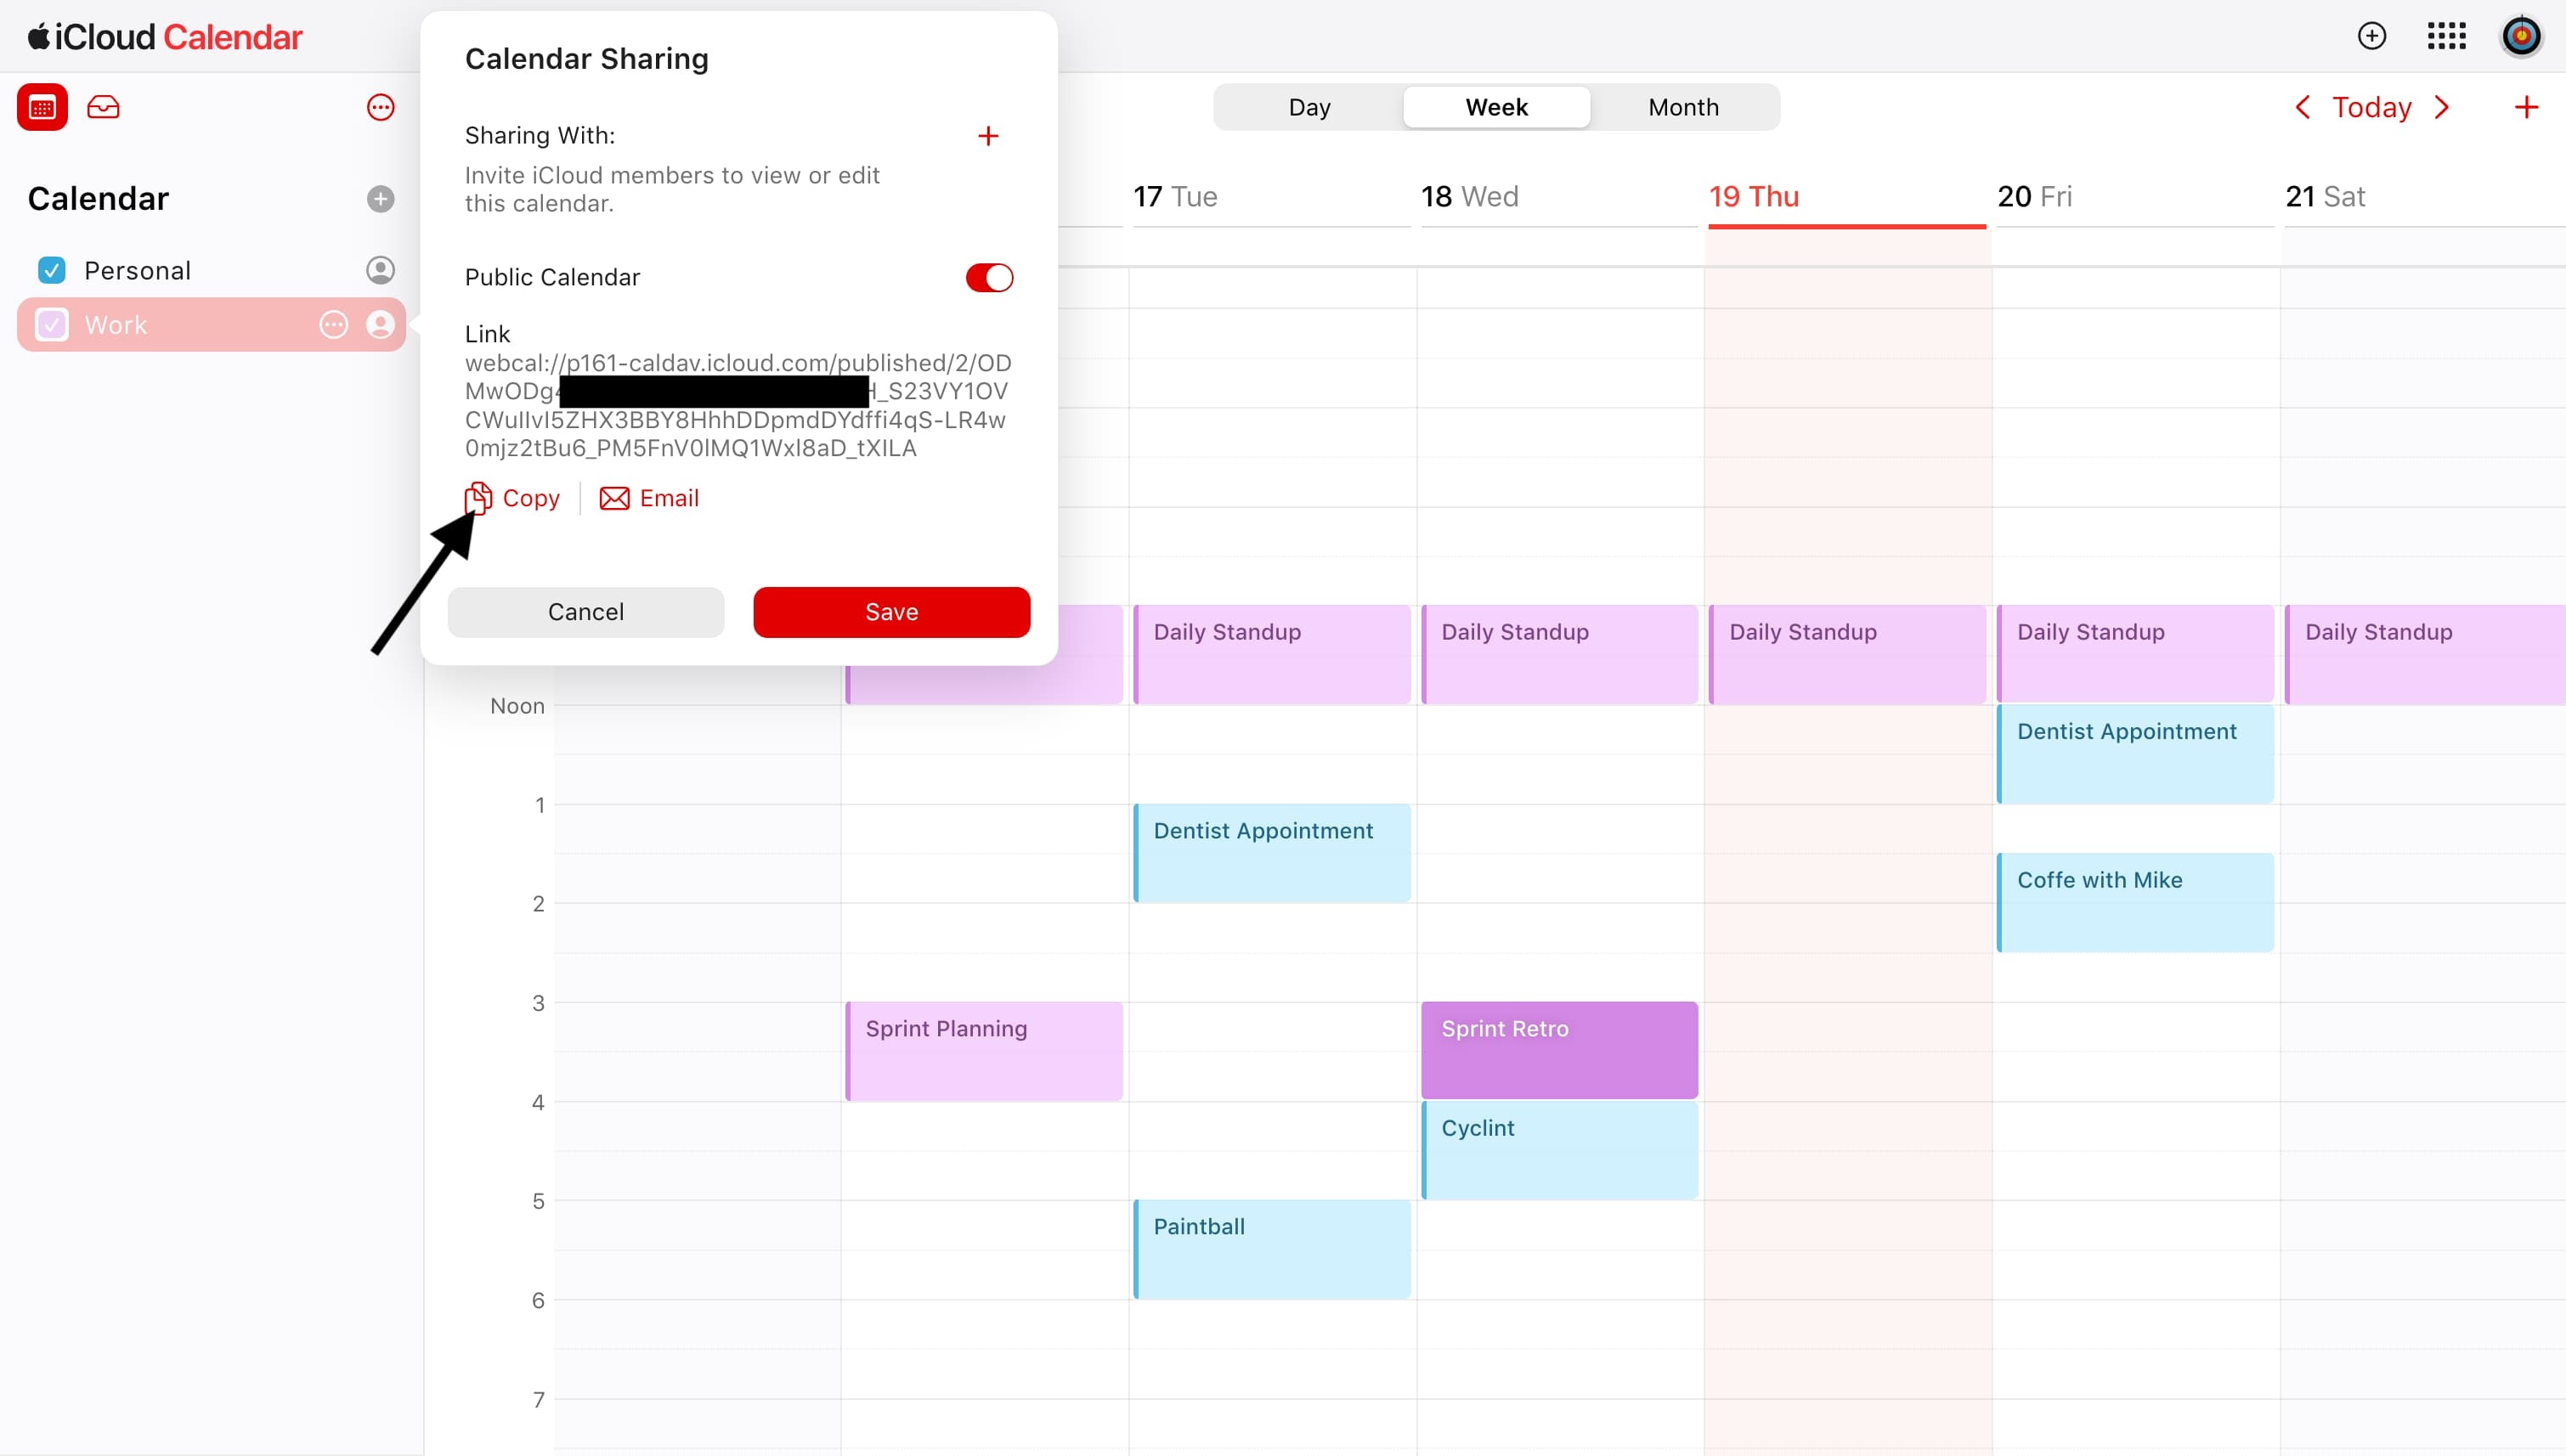 Apple Calendar - Copy the Webcal URL generated when toggling the